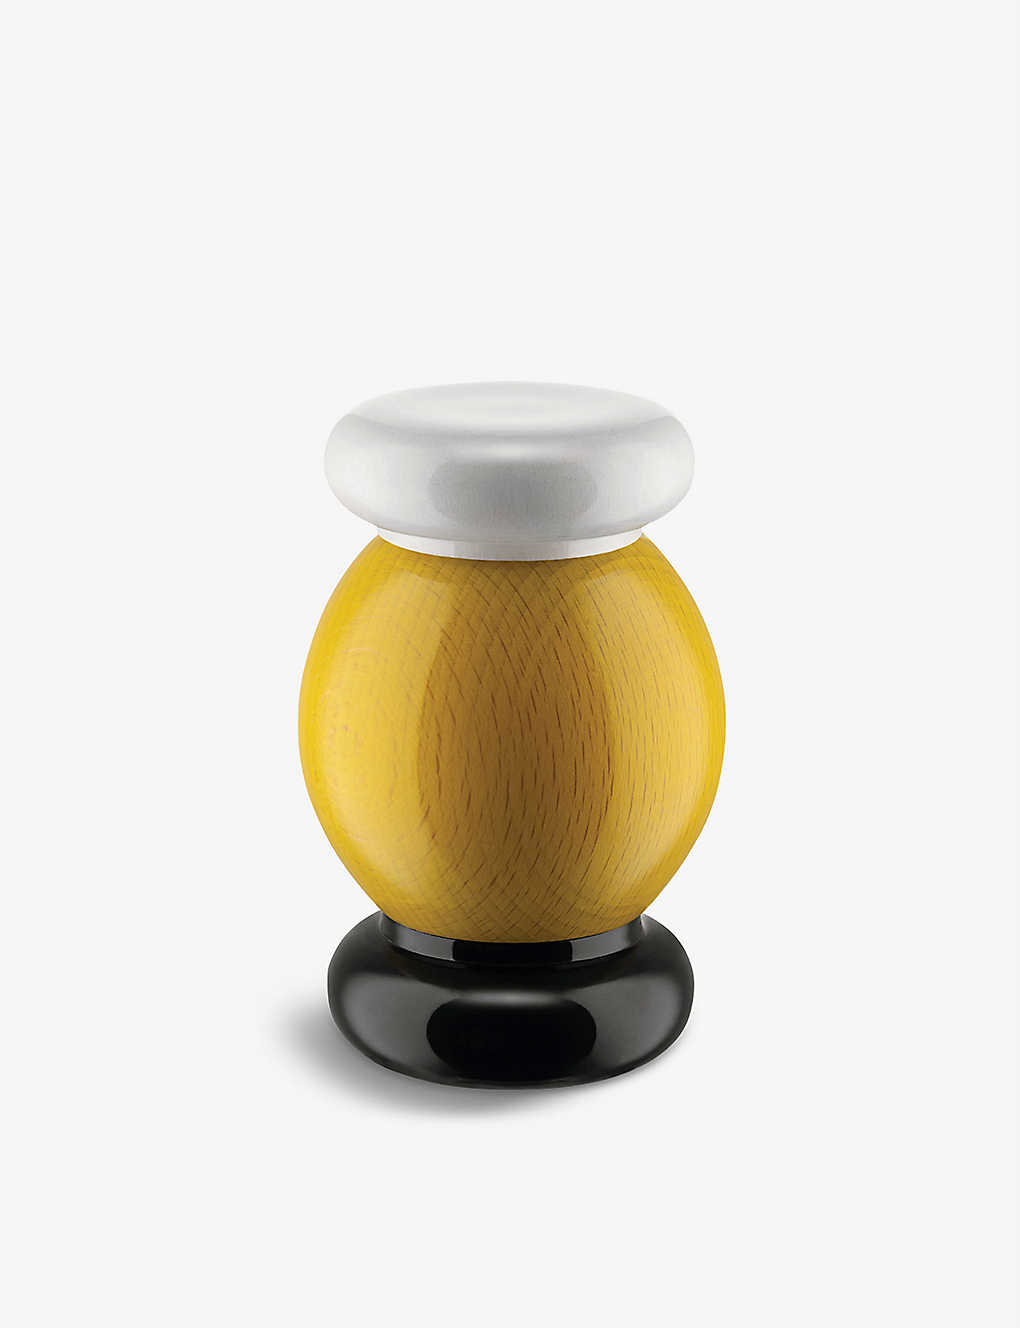 Alessi Ettore Sottsass Painted Beechwood Salt And Pepper Castor 11cm In Nocolor